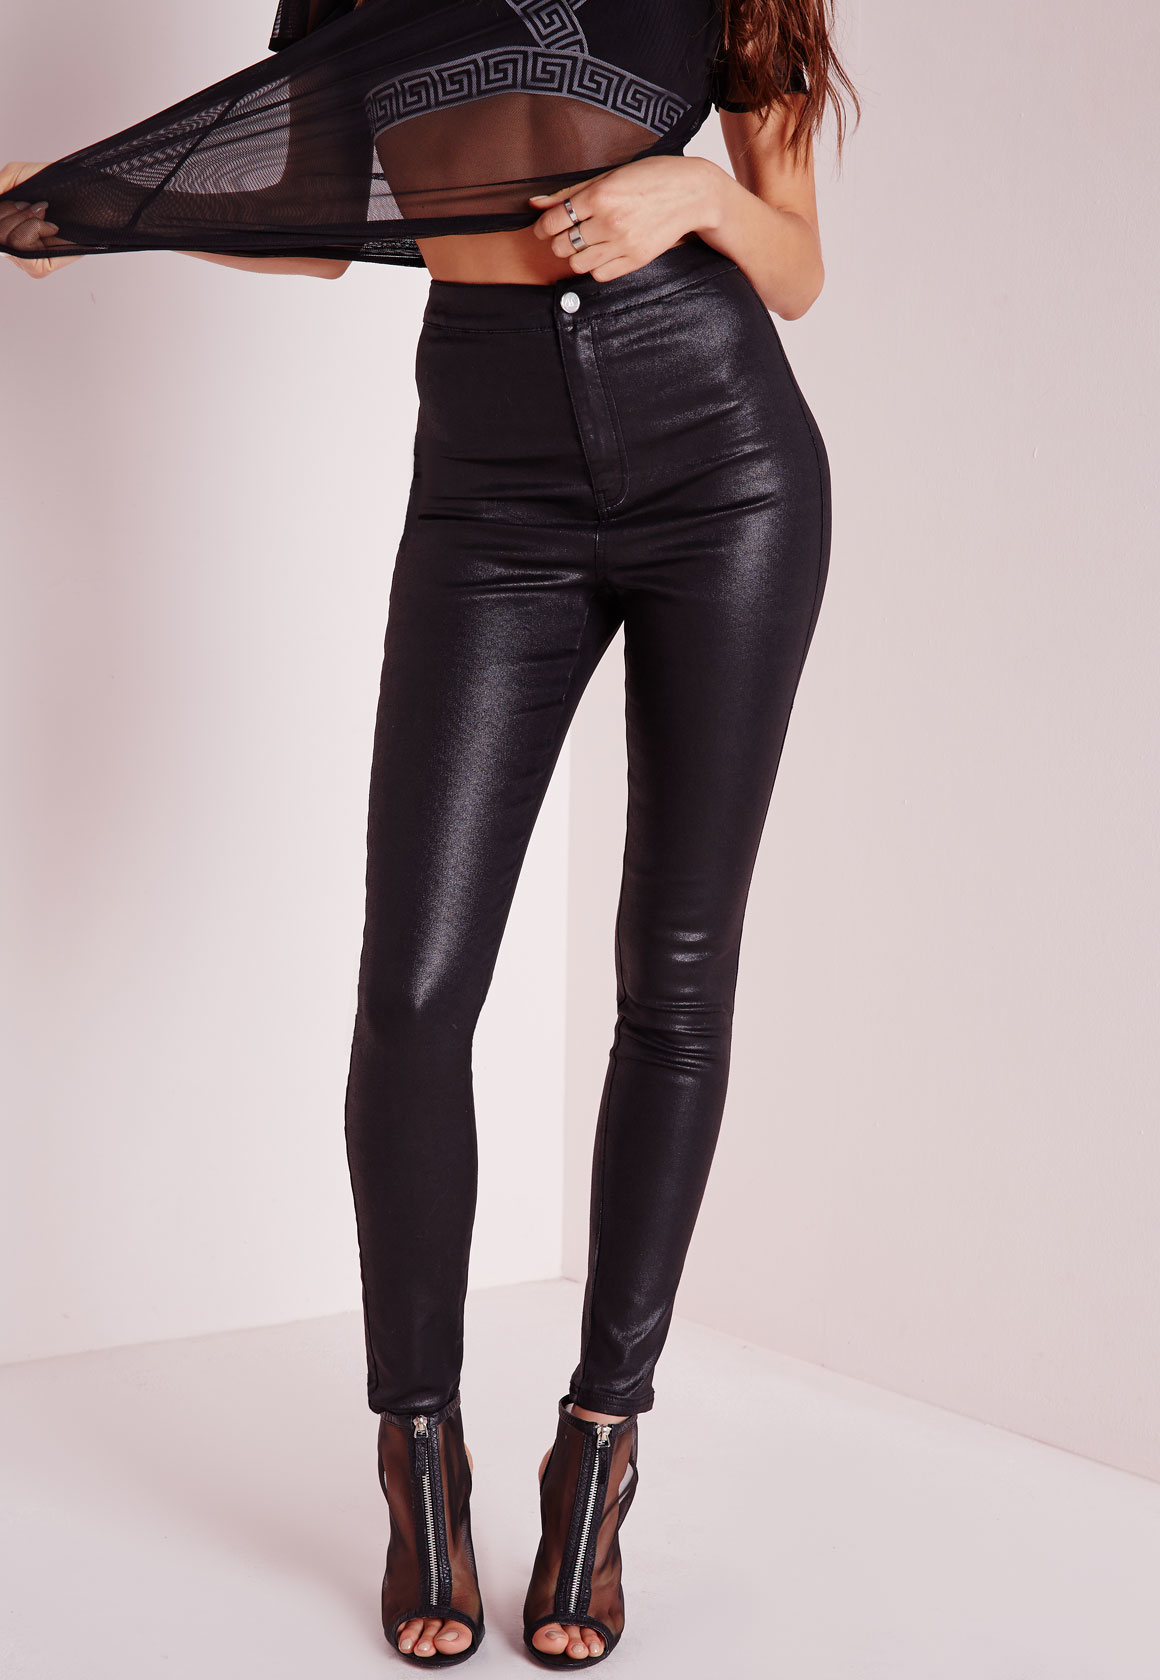 Lyst - Missguided Vice Super Stretch High Waisted Skinny Jeans Coated ...